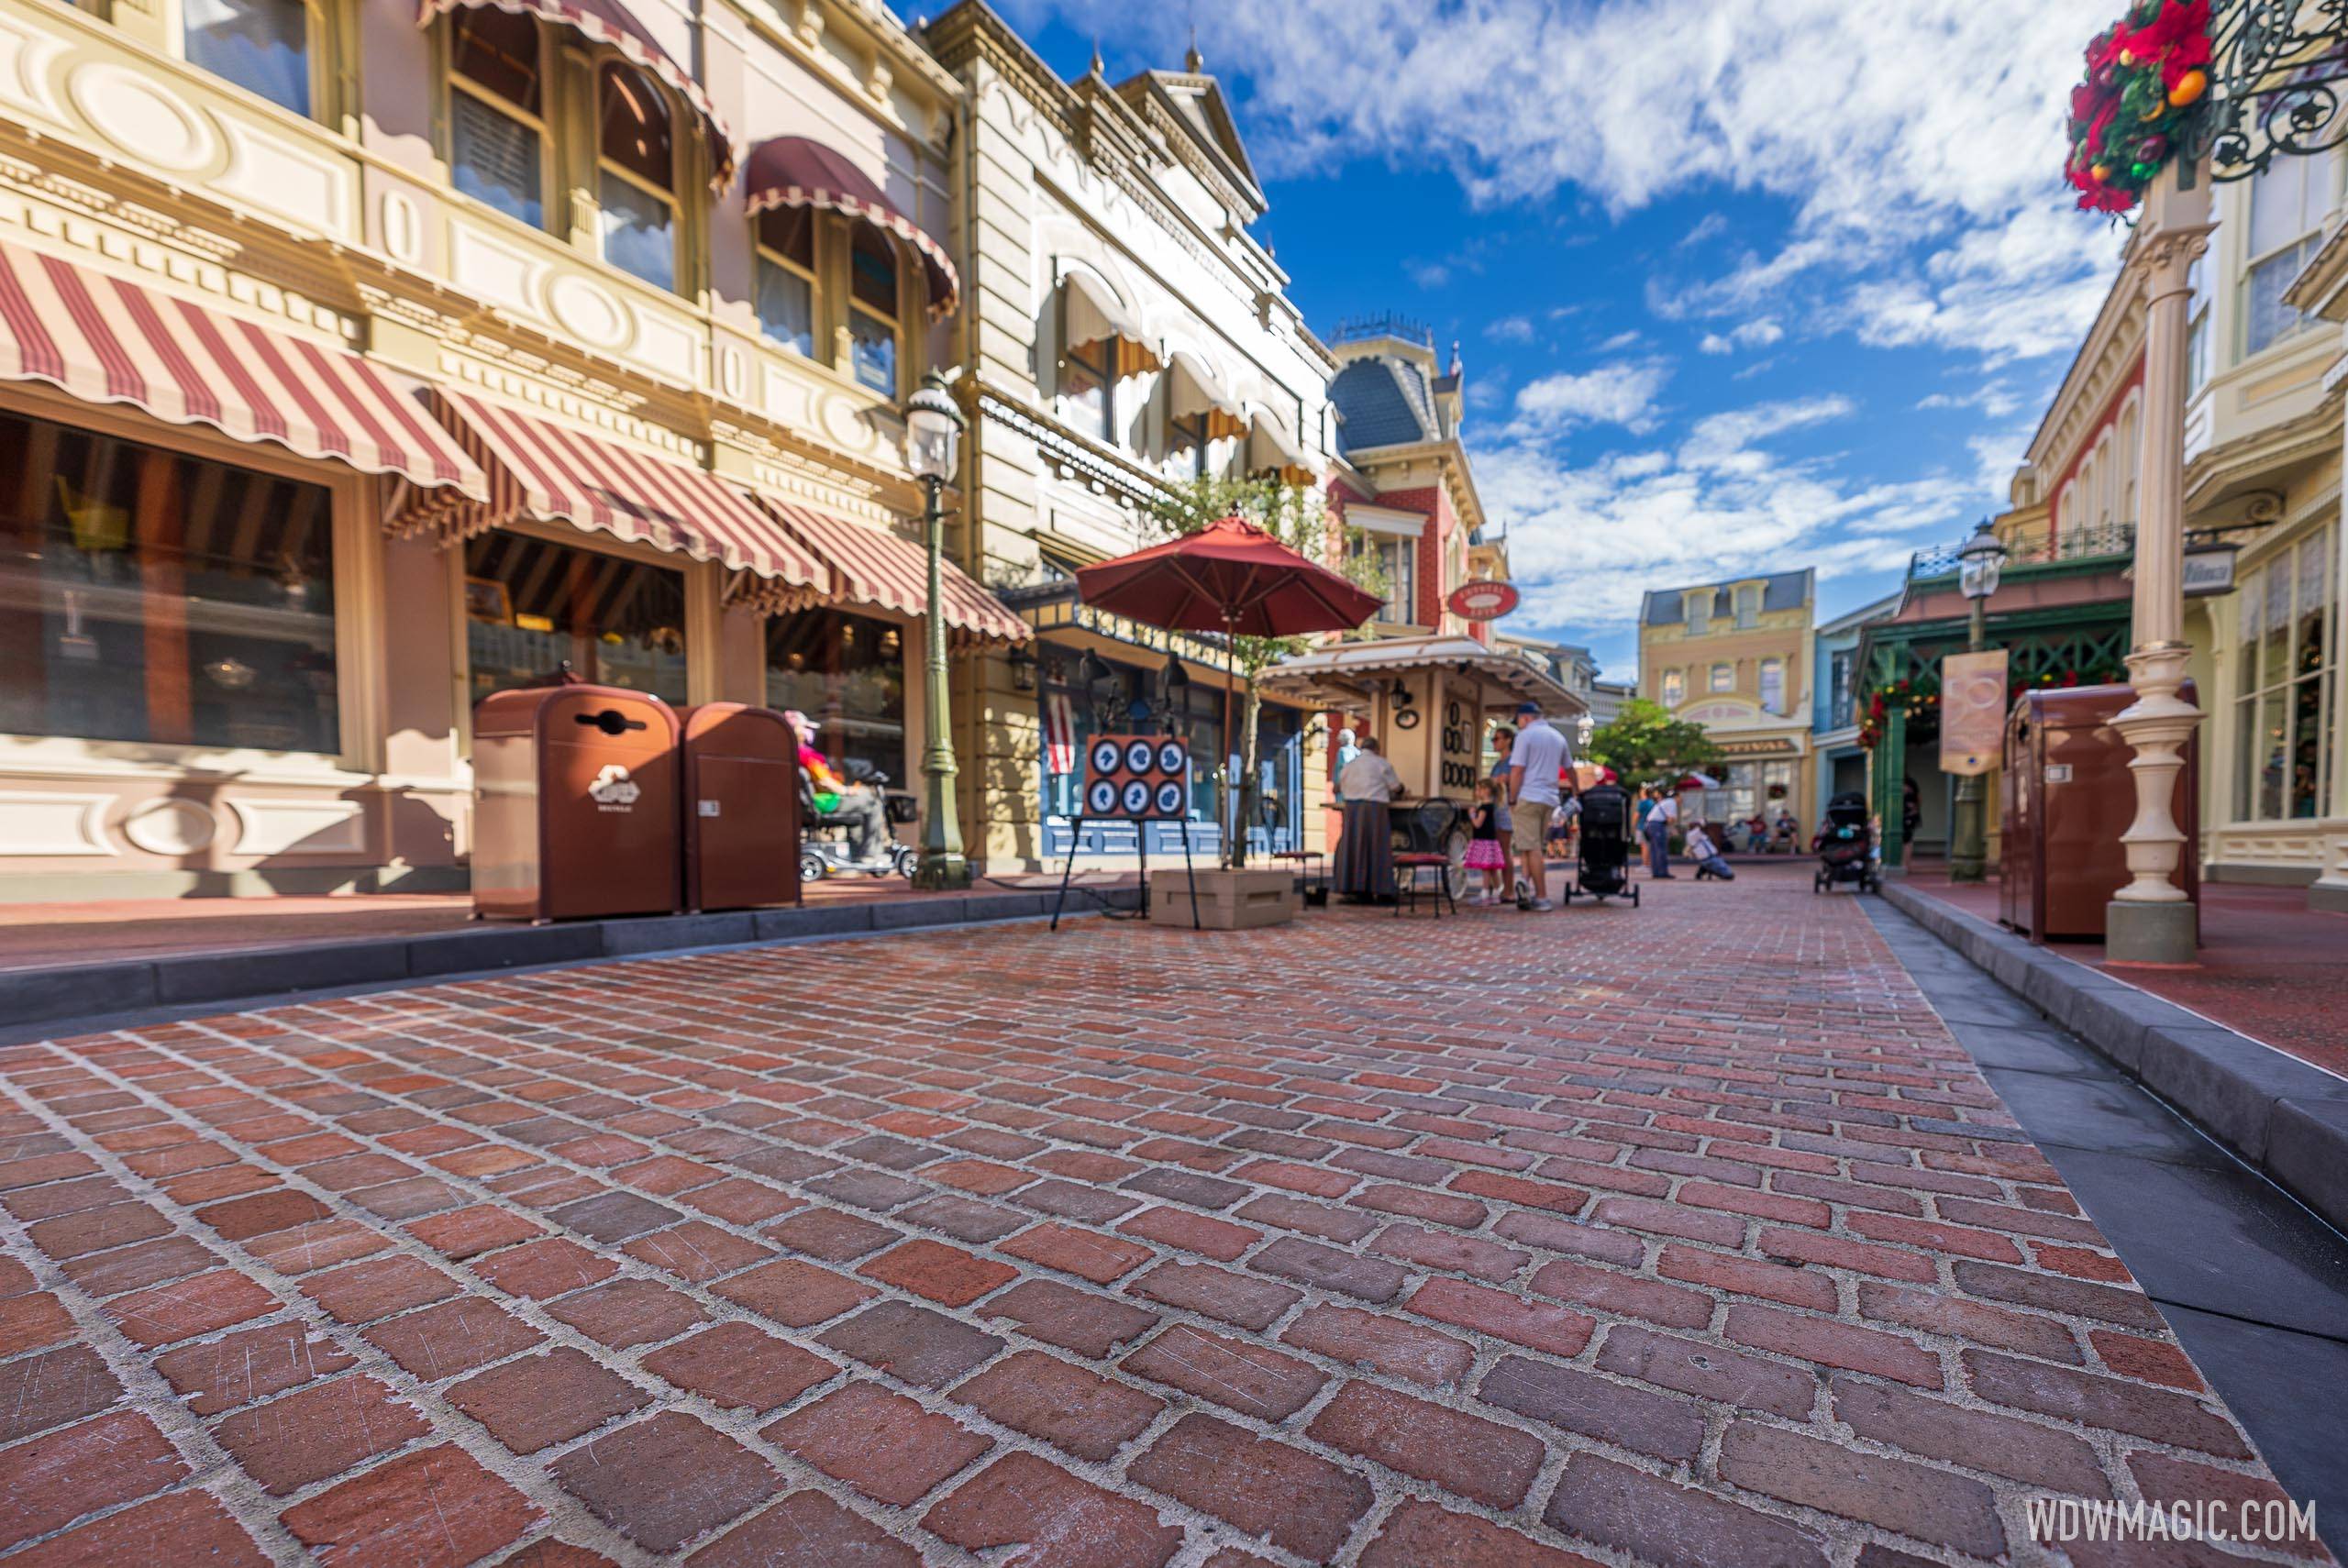 A look at the completed Center Street walkway refurbishment on Magic Kingdom's Main Street U.S.A.